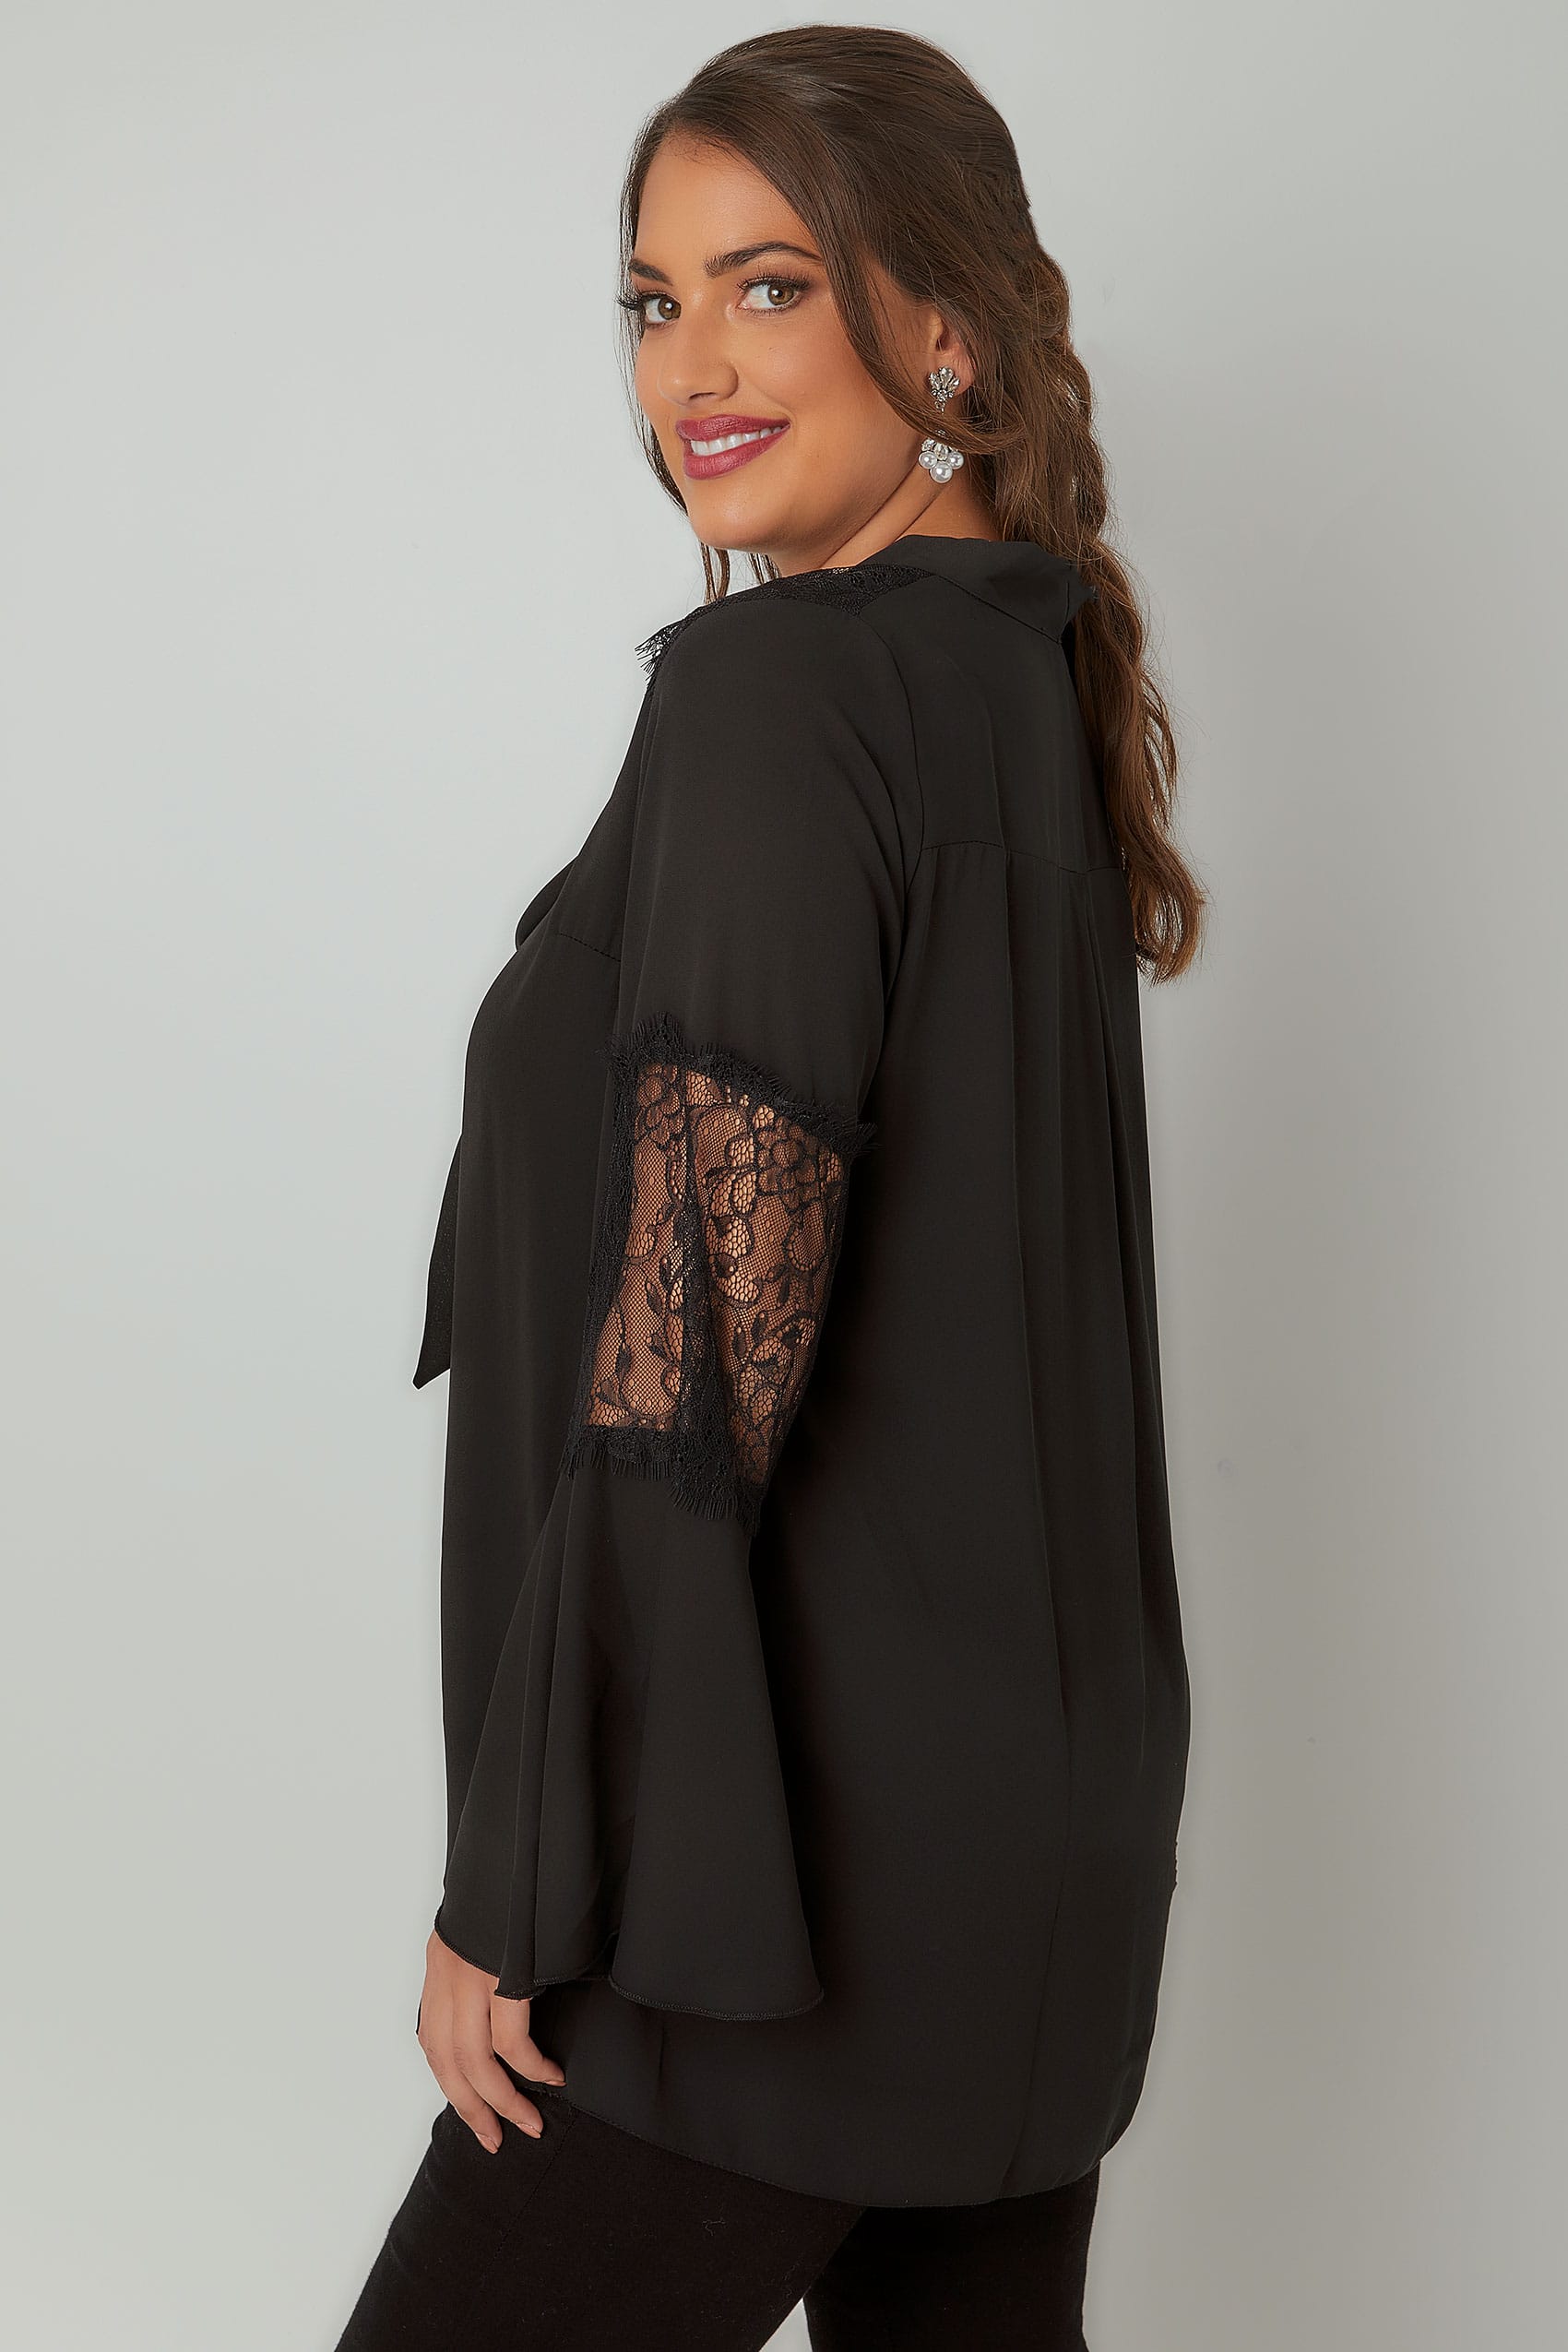 Yours London Black Pussy Bow Chiffon Blouse Plus Size 16 To 32